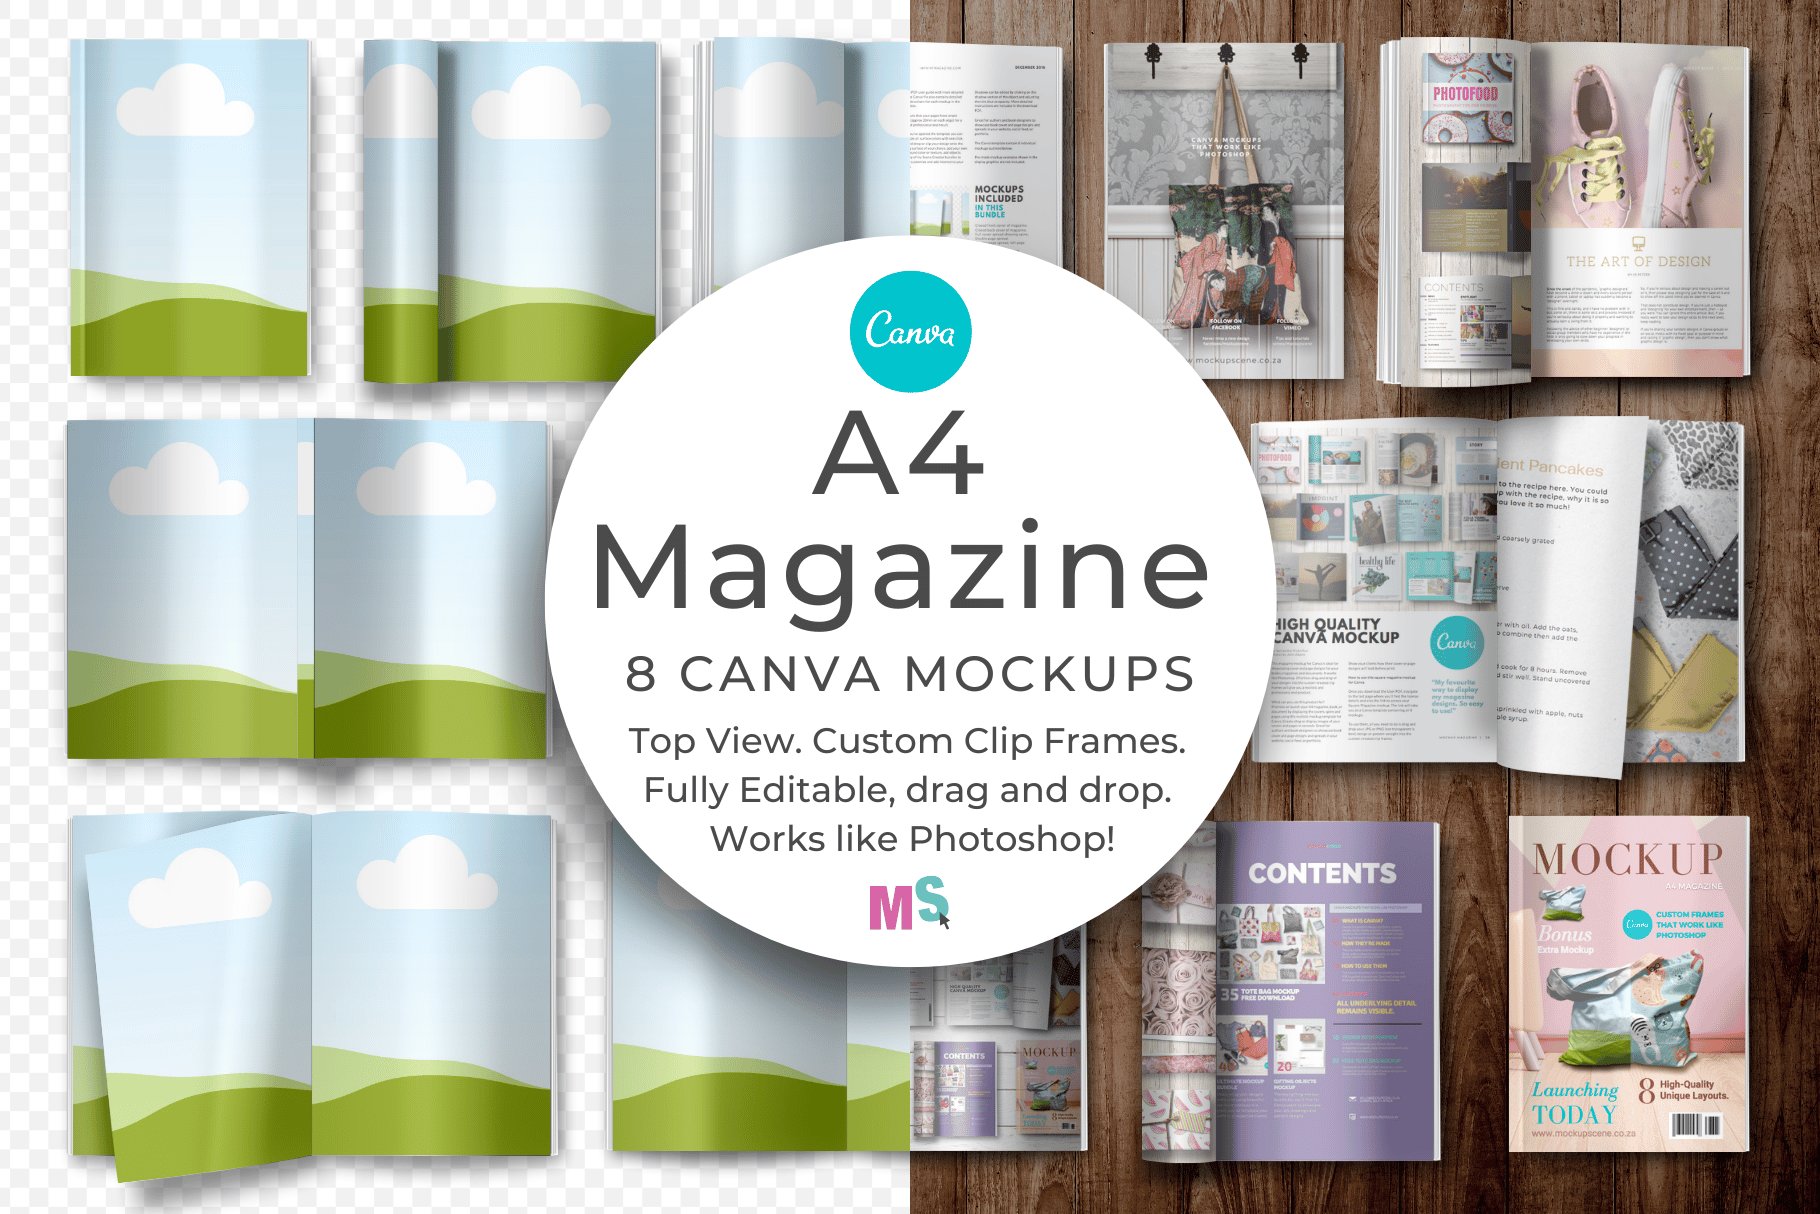 A4 Magazine Mockups for Canva cover image.